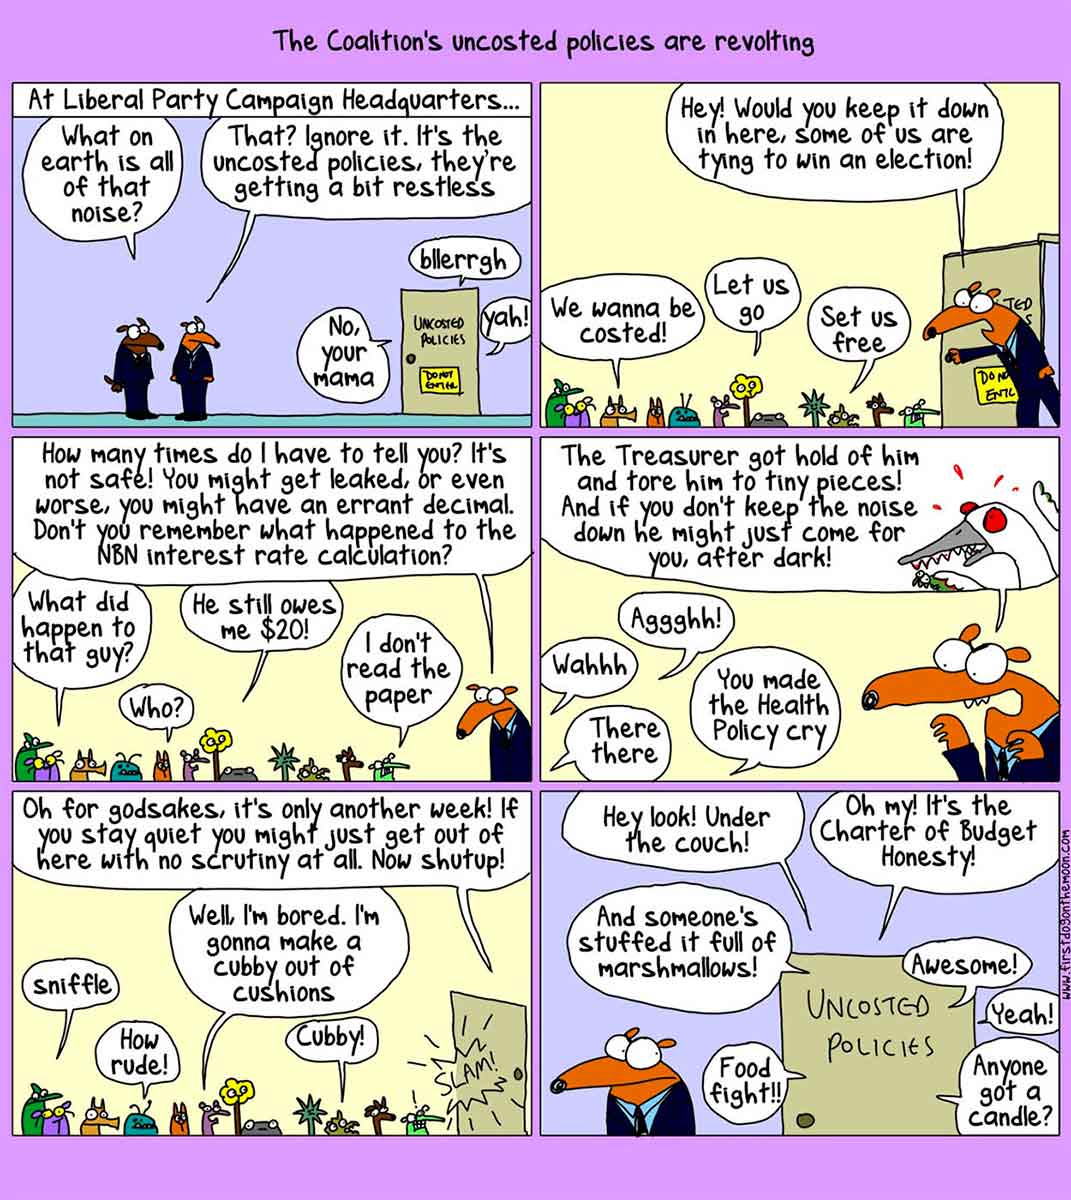 Political six-panel cartoon depicting the Liberal Party campaign headquarters. At the top of the cartoon is written 'The Coalition's uncosted policies are revolting'. In the first panel, two dogs in suits stand outside a door. Above is written 'At Liberal Party Campaign Headquarters ...' On a door nearby is written 'Uncosted Policies'. Speech balloons emerge from the door. They say 'No, your mama', 'Blerrgh' and 'Yoh!' One dog says 'What on earth is all of that noise?' The other dog says 'That? Ignore it. It's the uncosted policies, they're getting a bit restless'. In the next panel, one of the dogs enters the room of the Uncosted Policies. Many small and unusual animals mill about. The dog says 'Hey! Would you keep it down in here. Some of us are trying to win an election!' Some policies reply with 'We wanna be costed!', 'Let us go' and 'Set us free'. In the third panel, the dog says 'How many times do I have to tell you? It's not safe! You might get leaked, or even worse, you might have an errant decimal. Don't you remember what happened to the NBN interest rate calculation?' Some policies reply with 'What happened to that guy?', 'Who?', 'He still owes me $20!' and 'I don't read the paper'. In the next panel, the dog says 'The Treasurer got hold of him and tore him to tiny pieces! And if you don't keep the noise down he might just come for you, after dark!' Some policies reply with 'Wahhh', 'Aggghh!', 'There there' and 'You made the Health Policy cry'. In the next panel, the dog says 'Oh for Godsakes, it's only another week! If you stay quiet you might just get out here with no scrutiny at all. Now shut up!' Some polices reply with 'Sniffle', 'How rude!', 'Well, I'm bored. I'm gonna make a cubby out of cushions' and 'Cubby!' The dog leaves and slams the door. In the last panel, the dog stands outside the door, listening to what is going in the Uncosted Policies room. Speech bubbles surround the door. They say 'Hey look! Under the couch!', 'Oh my! It's the Charter of Budget Honesty!', 'And someone's stuffed it full of marshmallows!', 'Food fight!', 'Awesome!', 'Yeah!' and 'Anyone got a candle?'. - click to view larger image